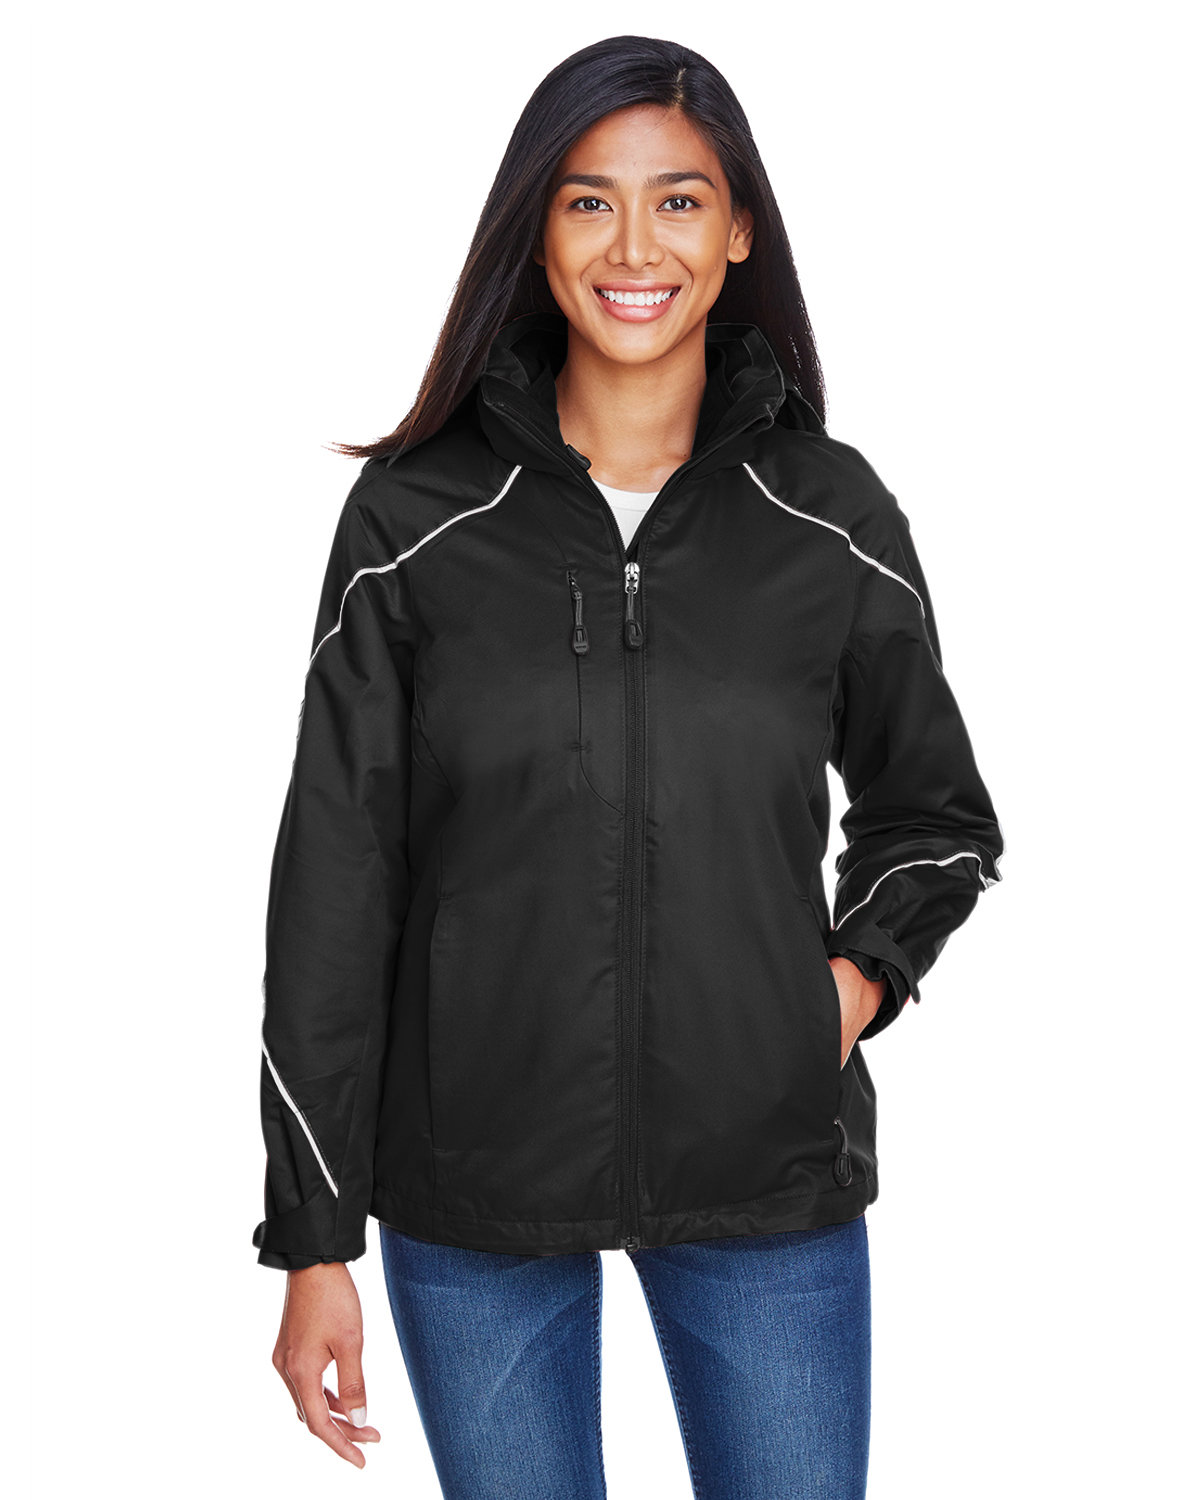 North End 78196 - Ladies' Angle 3-in-1 Jacket with Bonded Fleece Liner